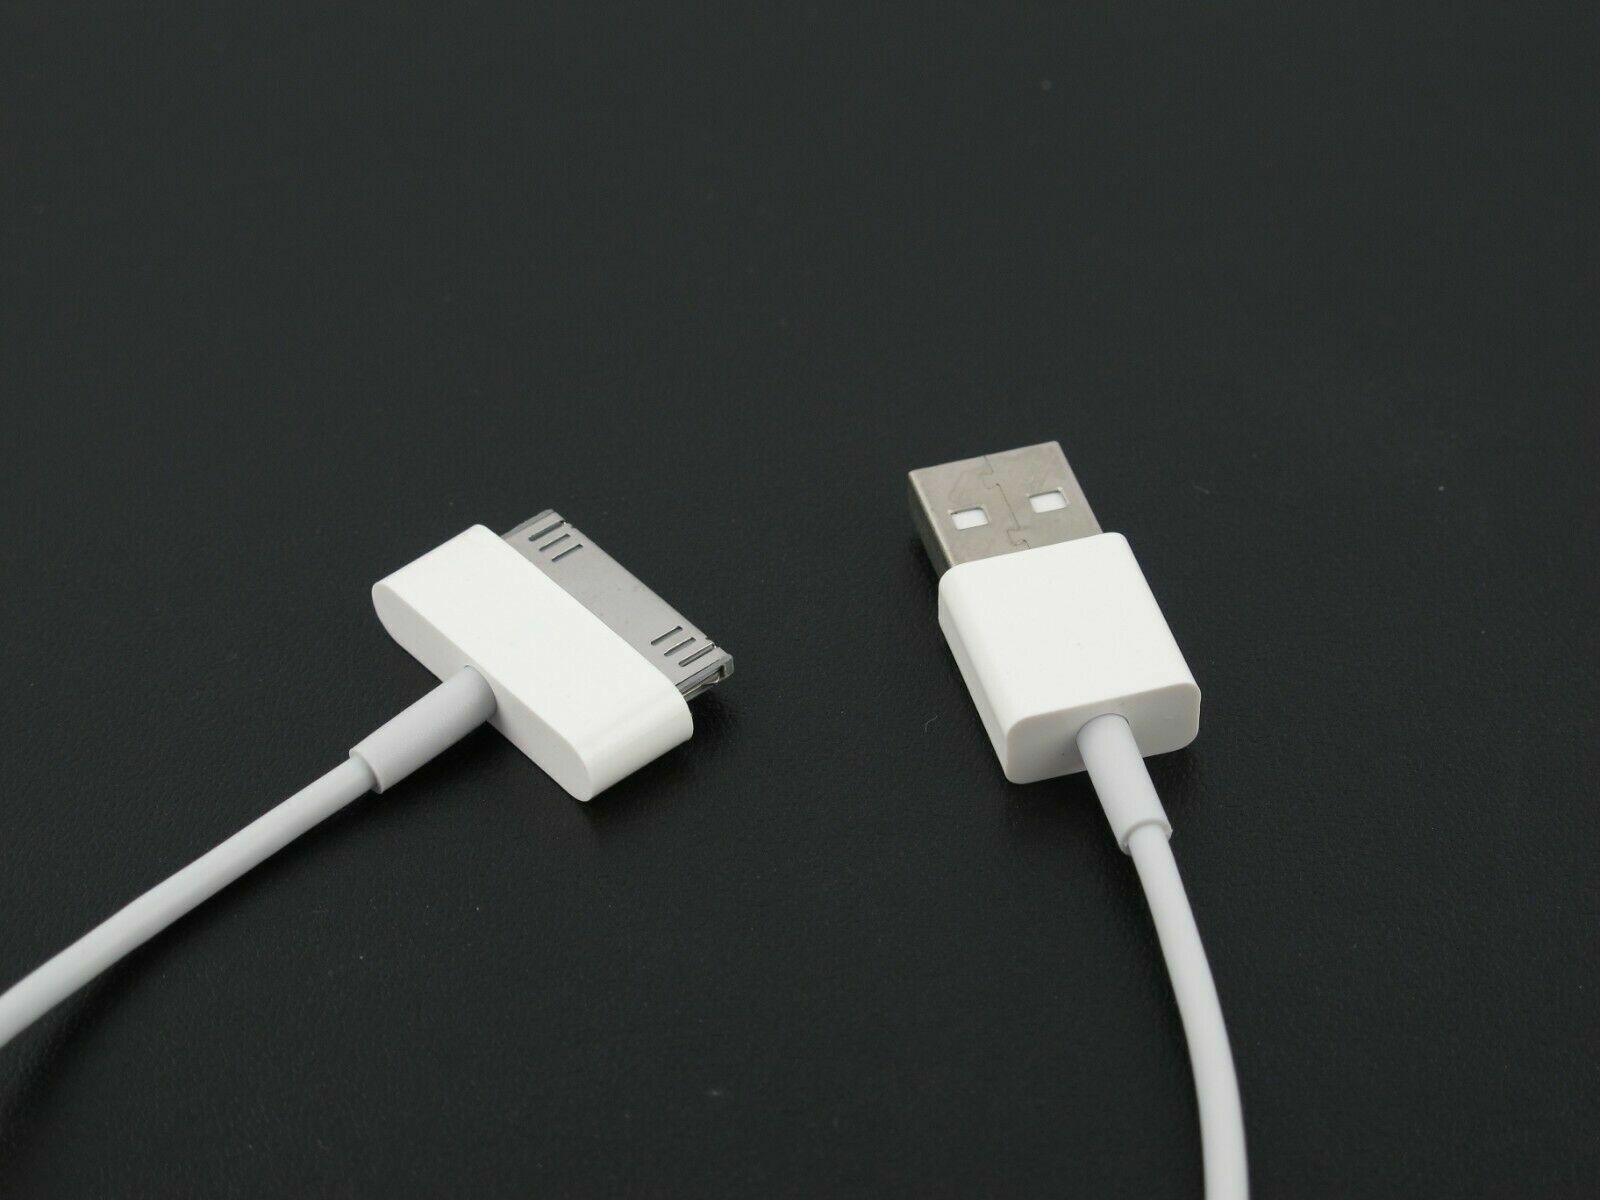 2 USB Charger Cable for Tablet Apple iPad 1 2 3 1st 2nd 3rd GEN Unbranded Does Not Apply - фотография #3